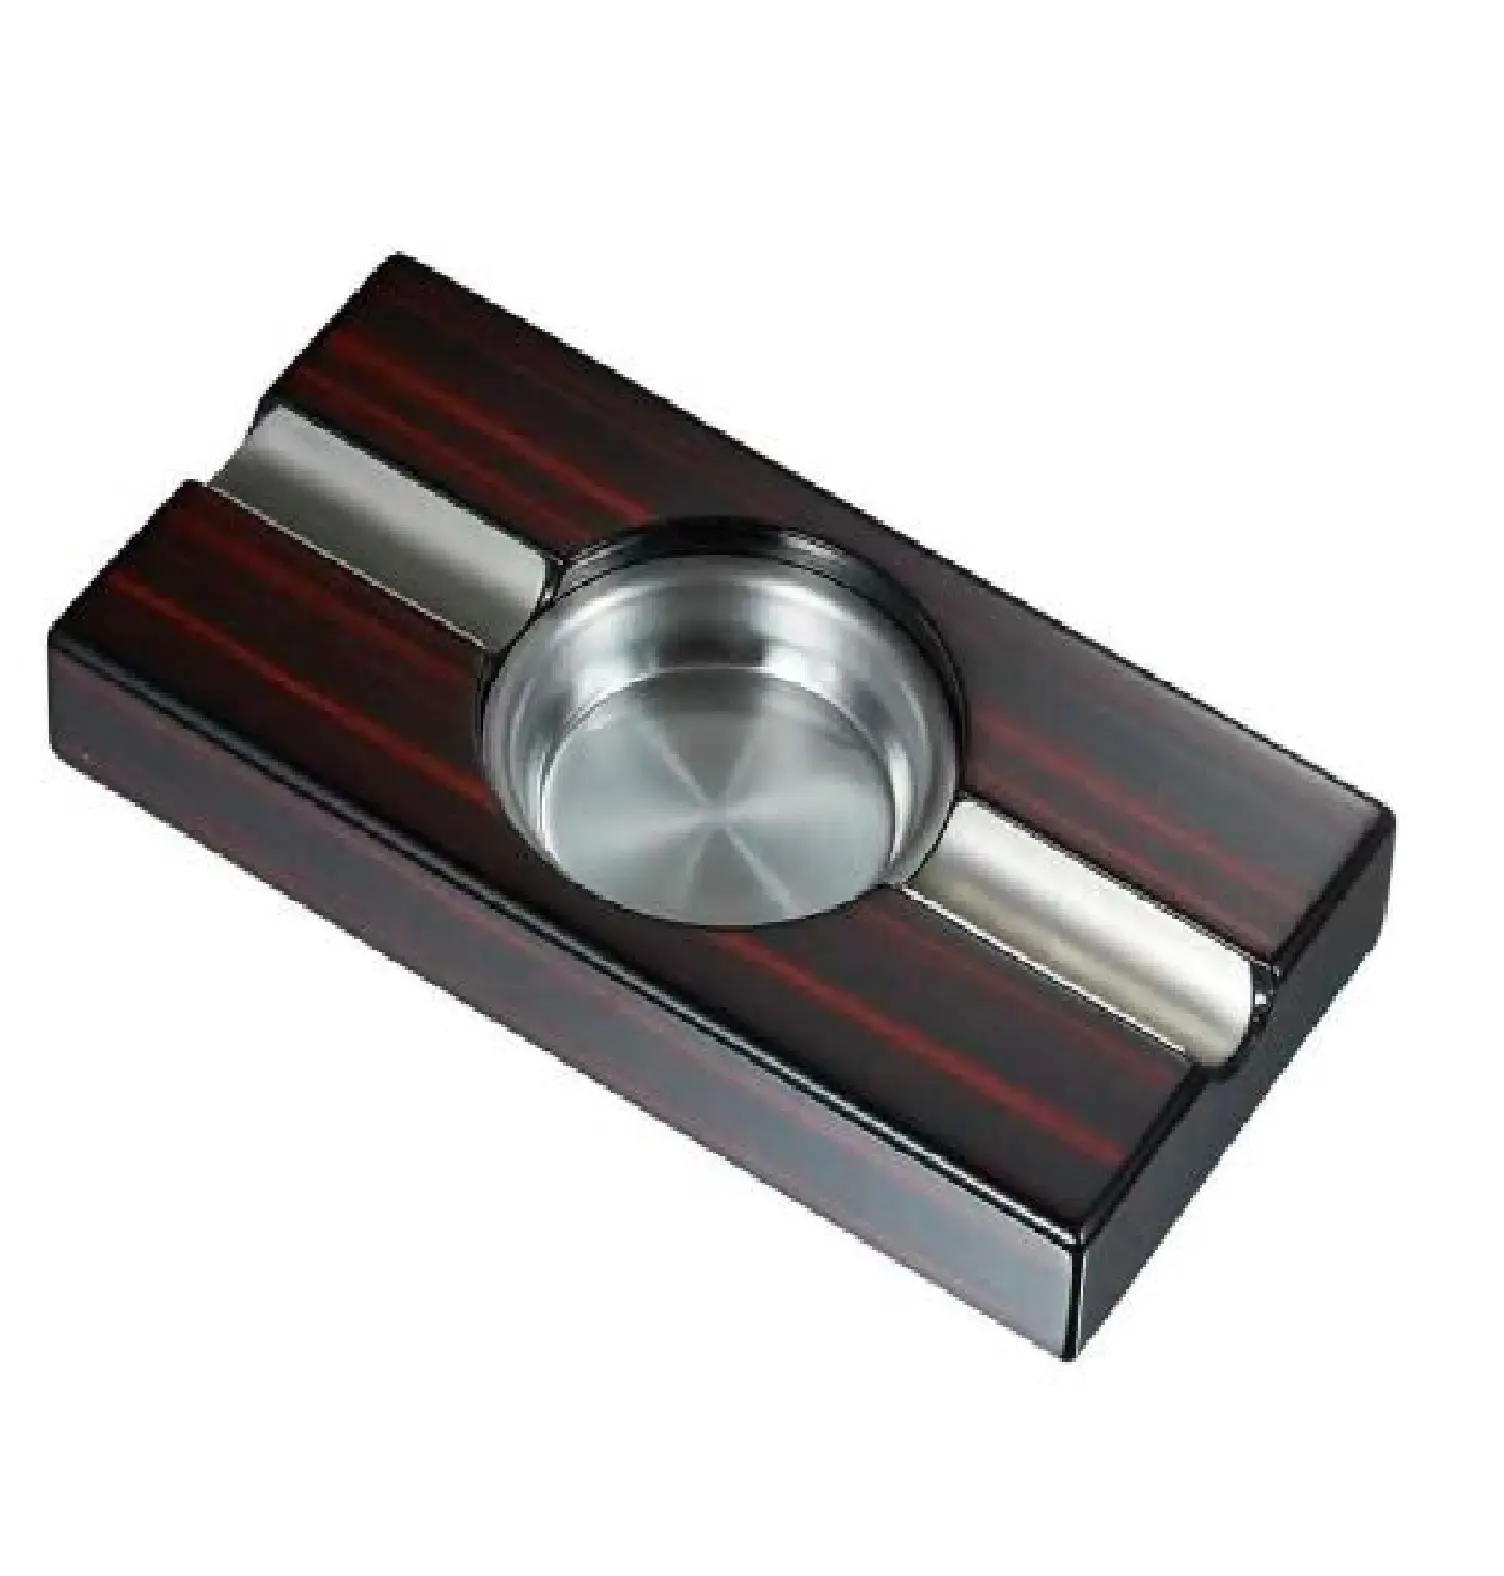 Dark Brown Color Rectangular Shape Ashtray For Home Restaurant Bars And Office Customized Size Bar Supplies Metal Lid